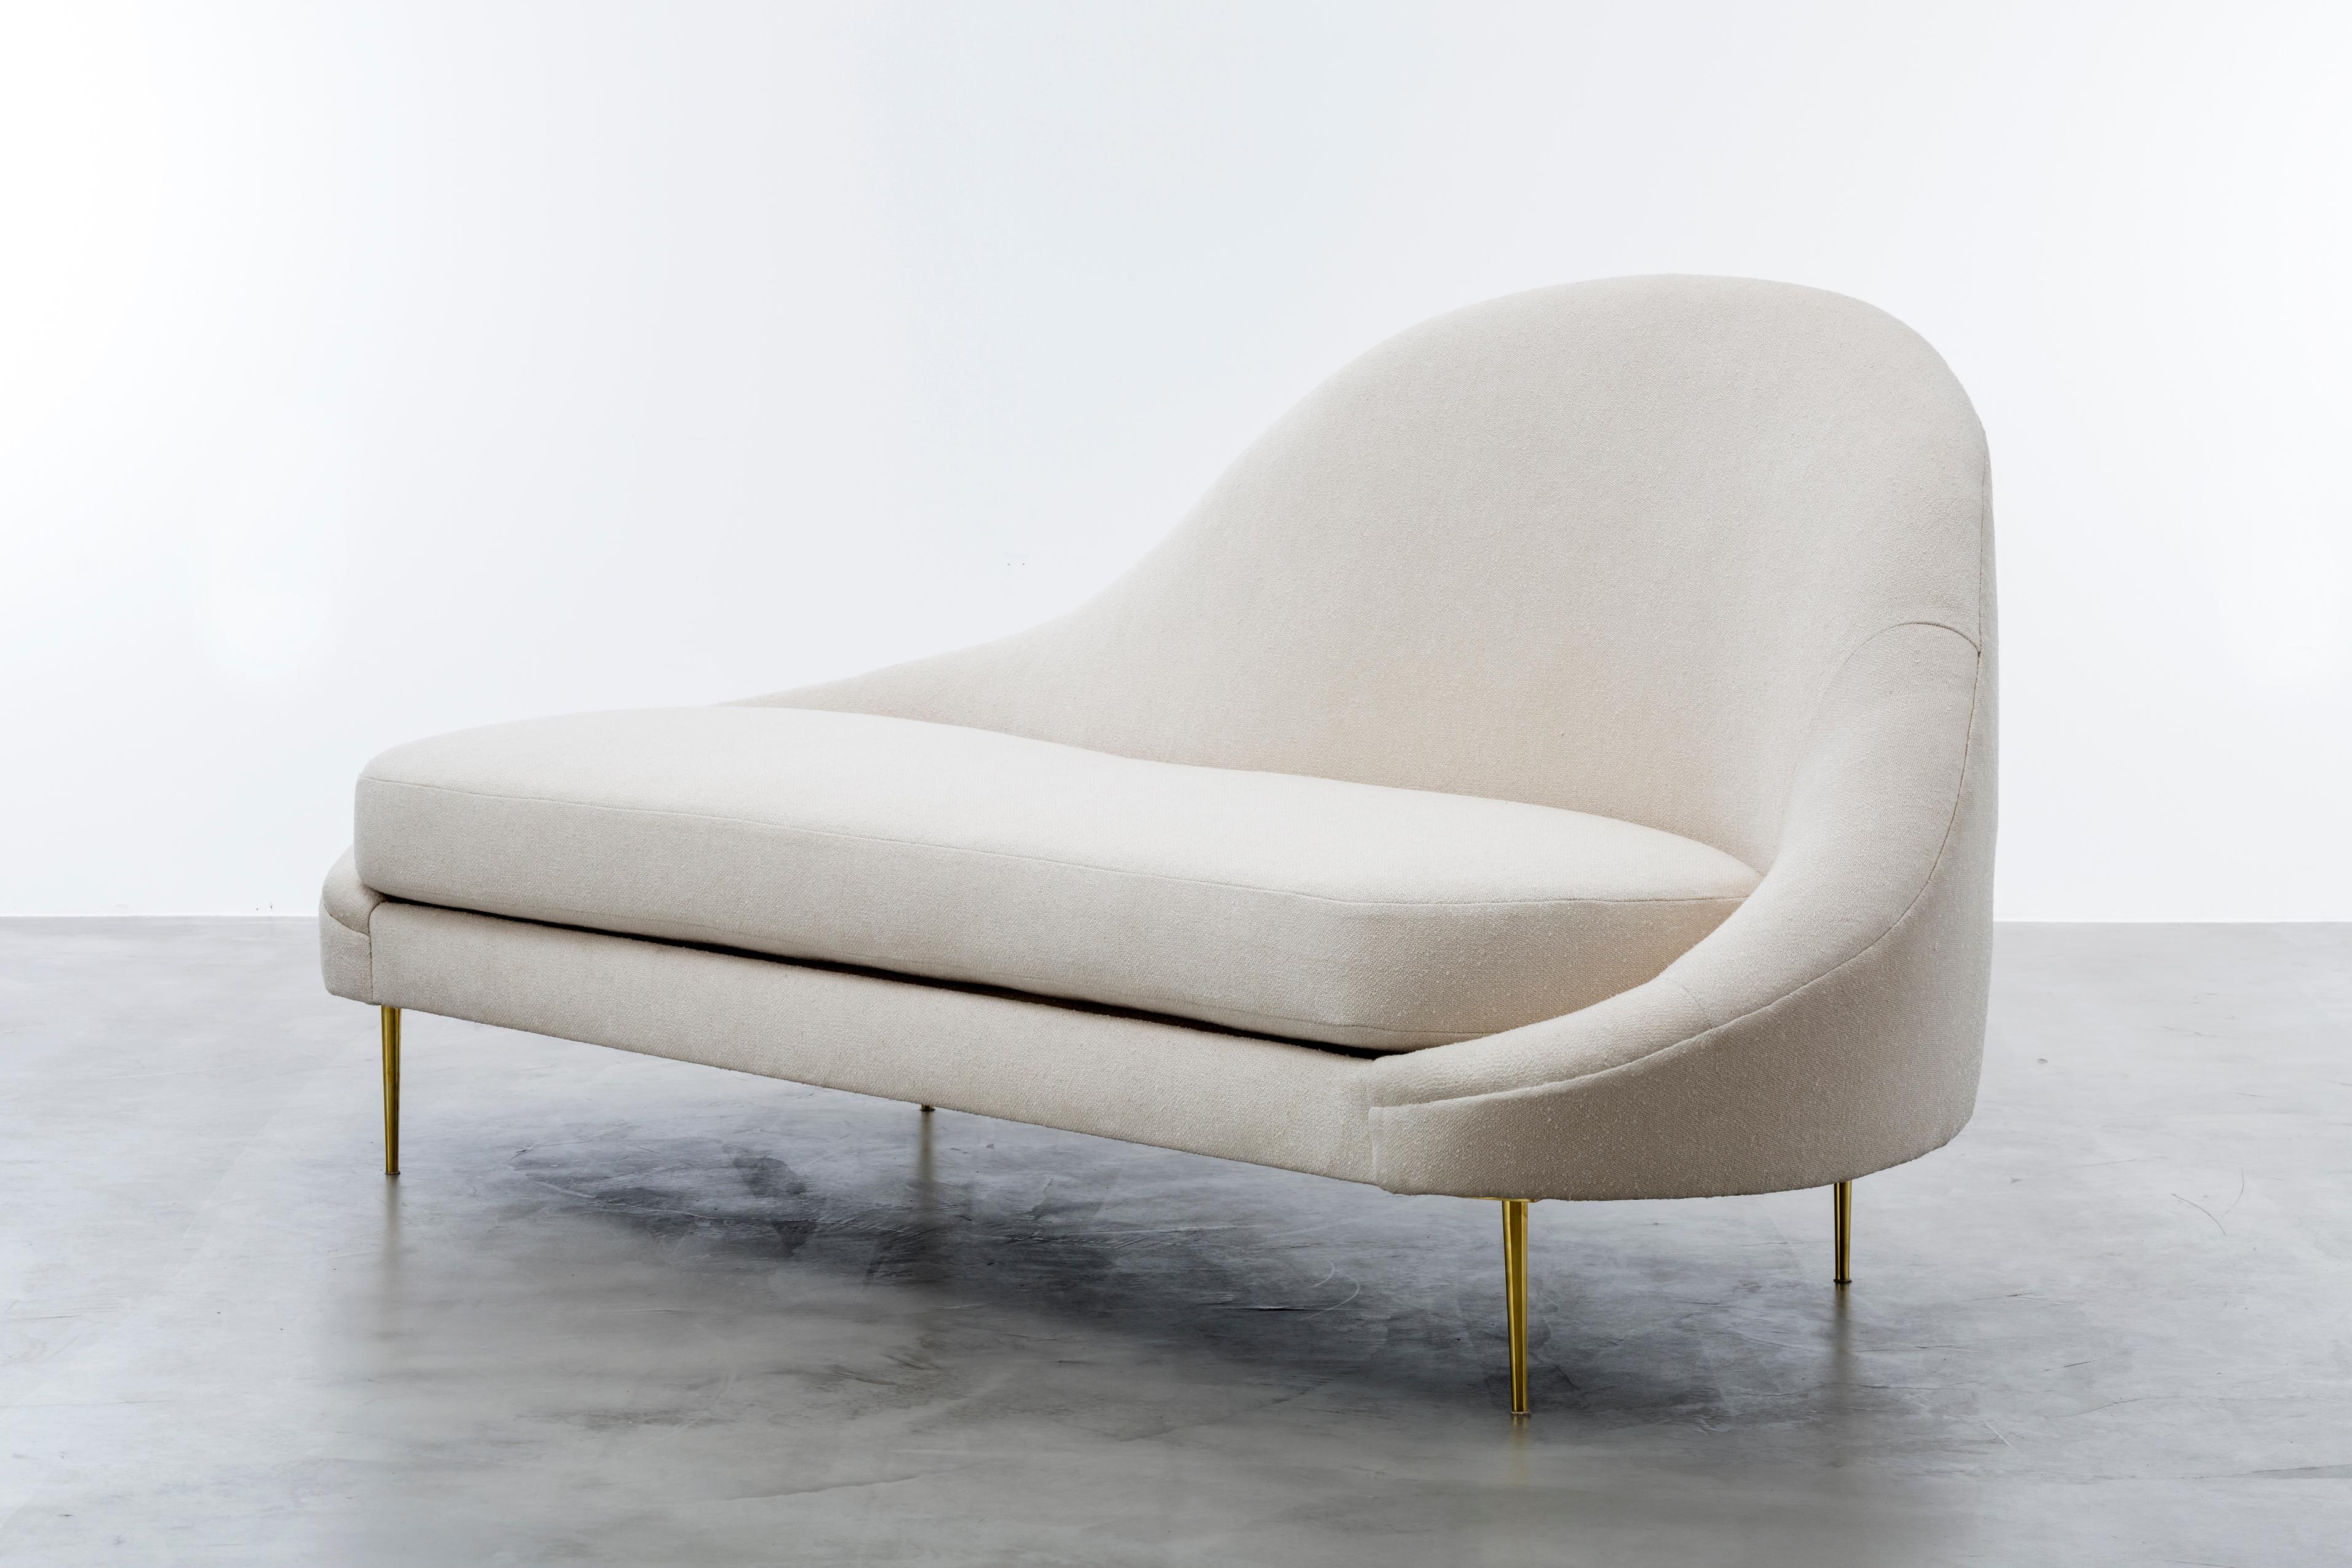 SANDRINE CHAISE - Modern Asymmetrical Slope Chaise in Nubby Boucle Fabric 

The Sandrine Chaise is a luxurious and elegant piece of furniture that is inspired by the curvature of Gaudi architecture. It features an asymmetrical and sophisticated